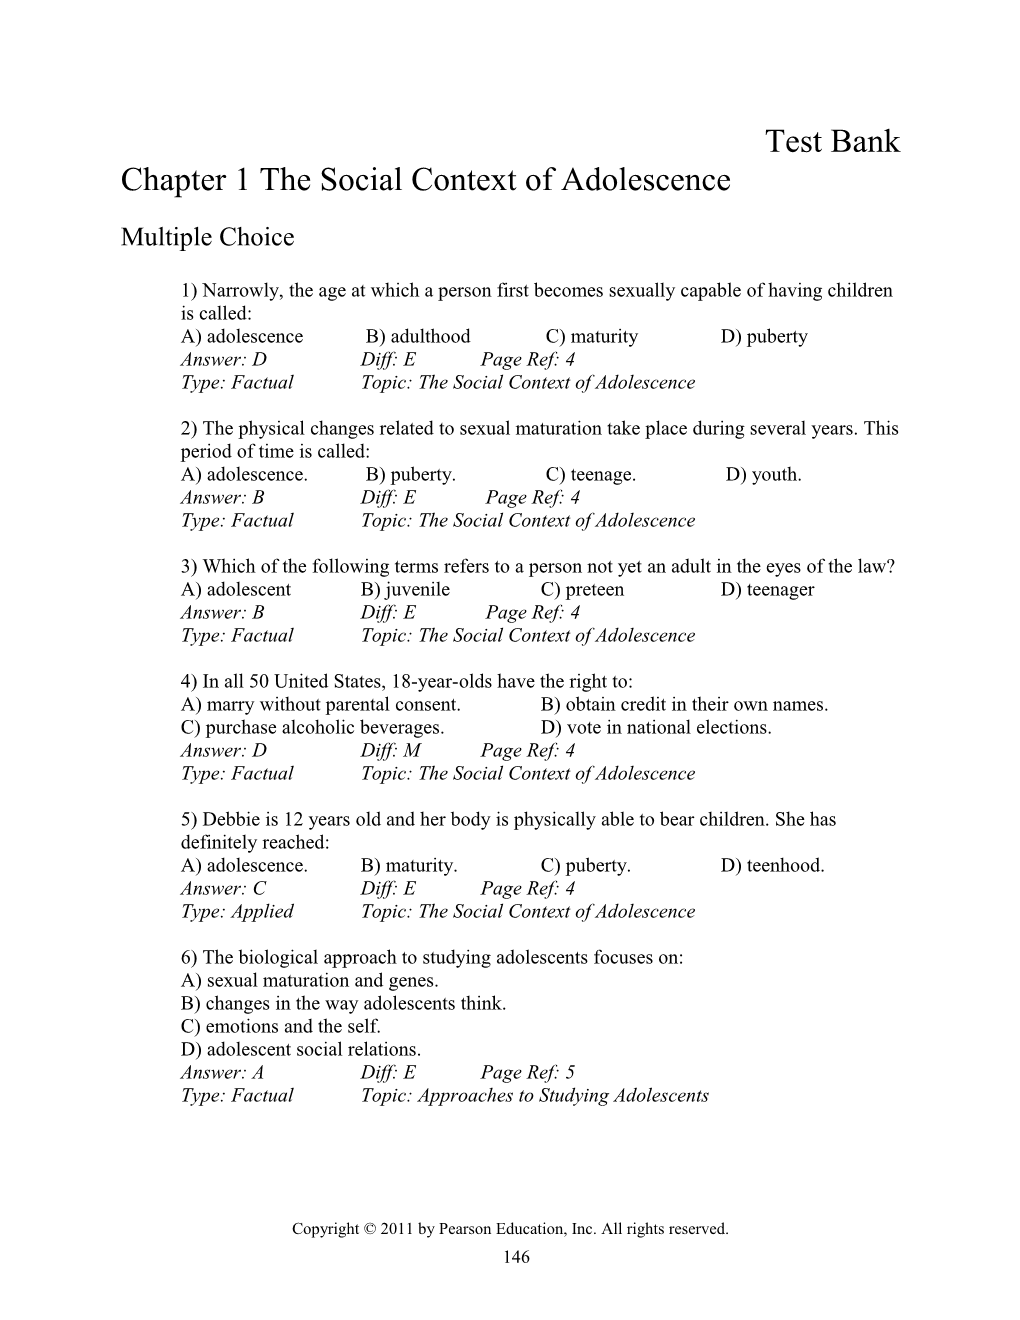 Chapter 1 the Social Context of Adolescence